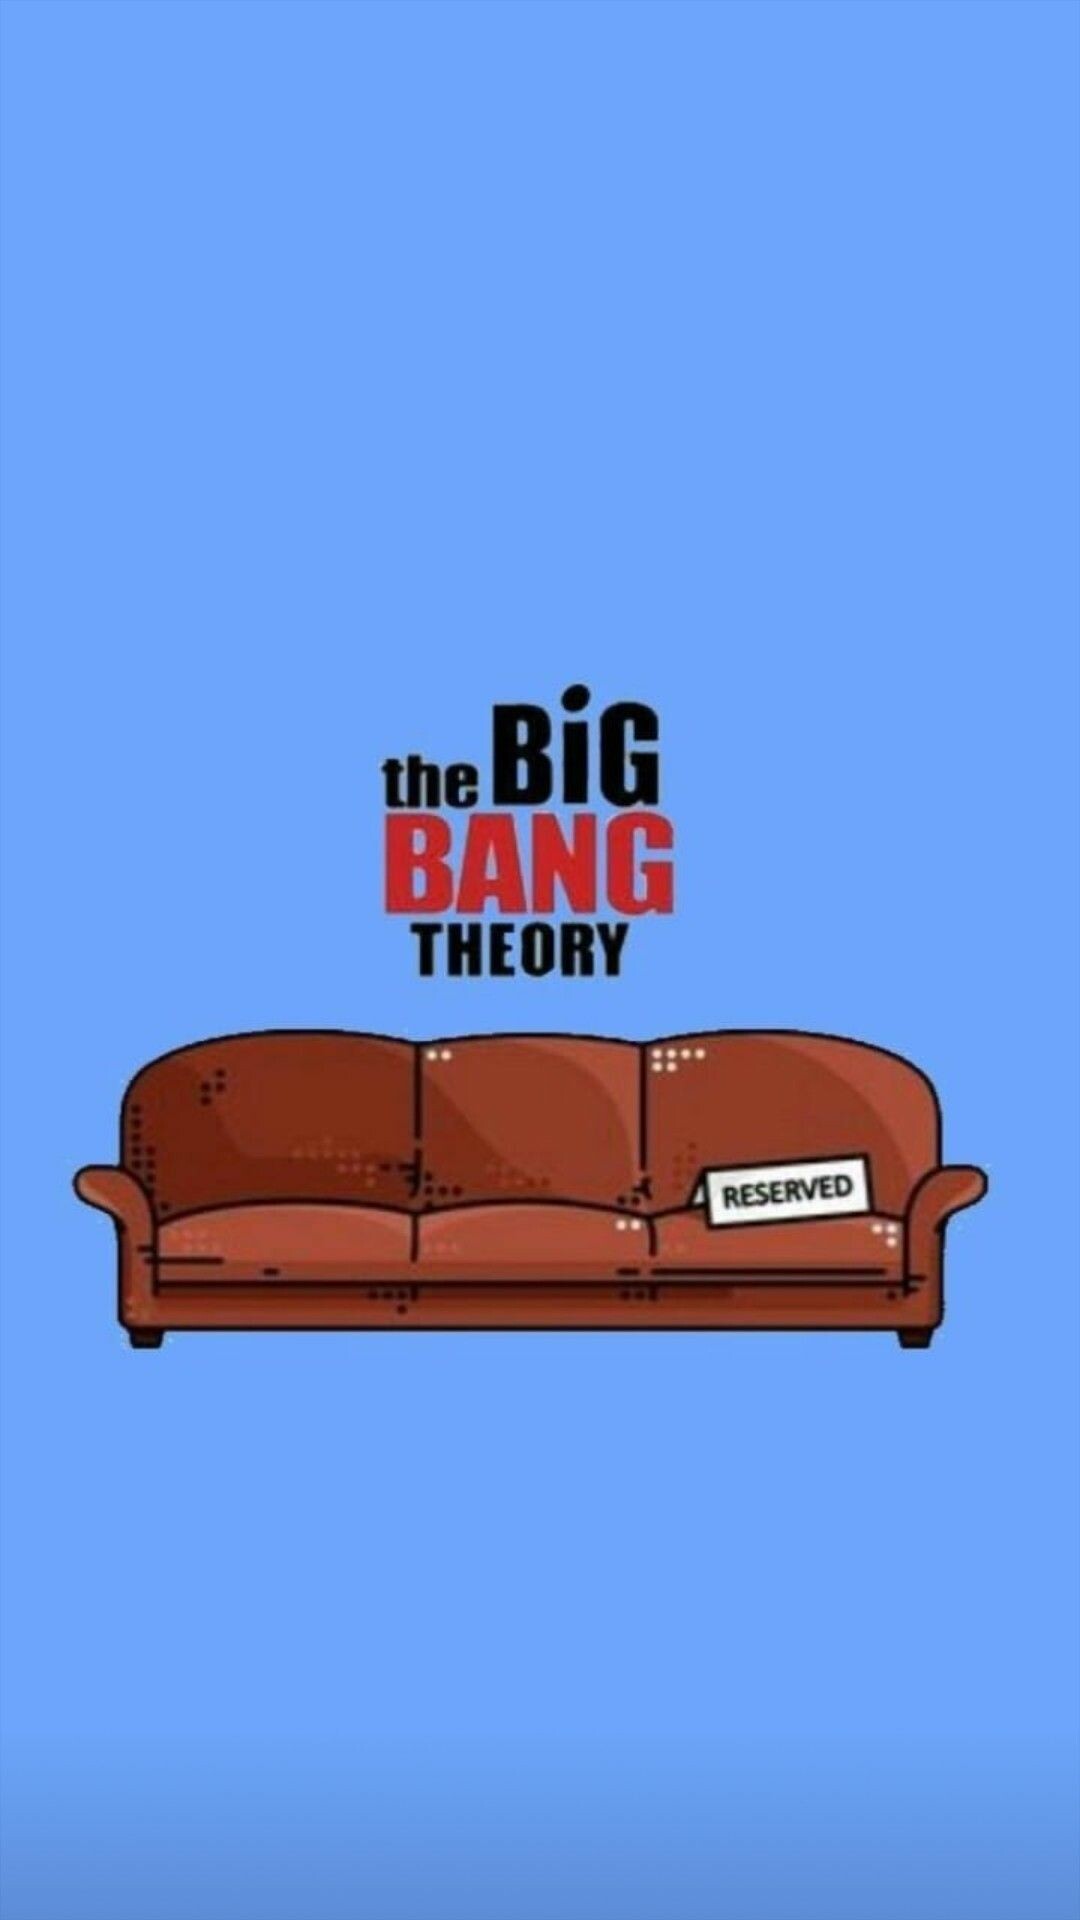 The Big Bang Theory: Four genius-level friends with careers ranging from theoretical physics to engineering and a pretty girl who shakes up their dependence on The Scientific Method and geeky lifestyle, Sitcom. 1080x1920 Full HD Wallpaper.